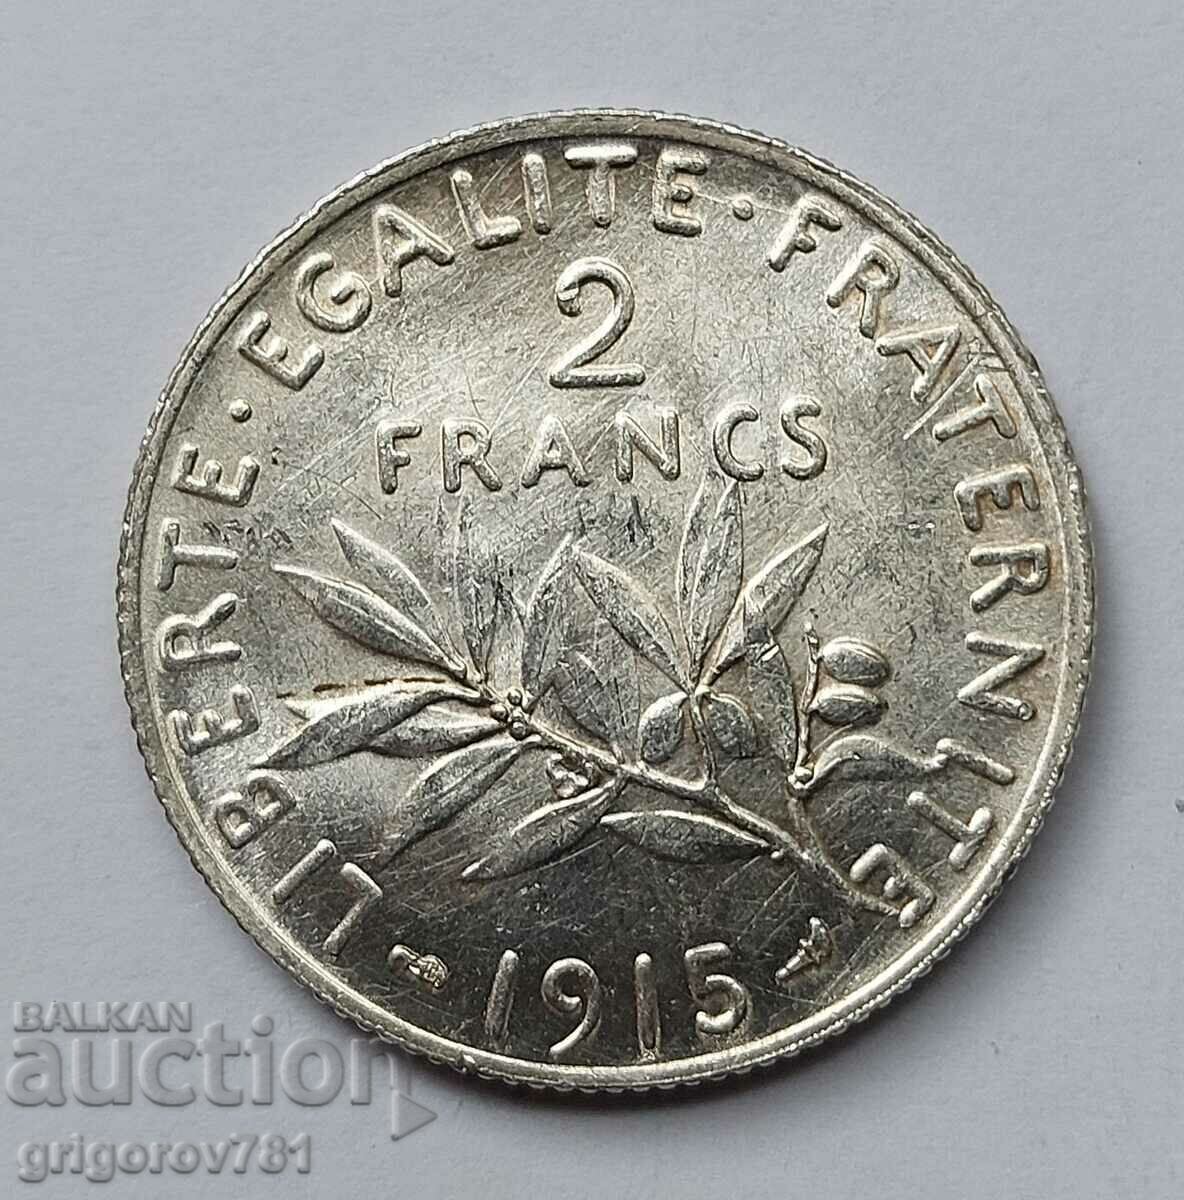 2 Francs Silver France 1915 - Silver Coin #77